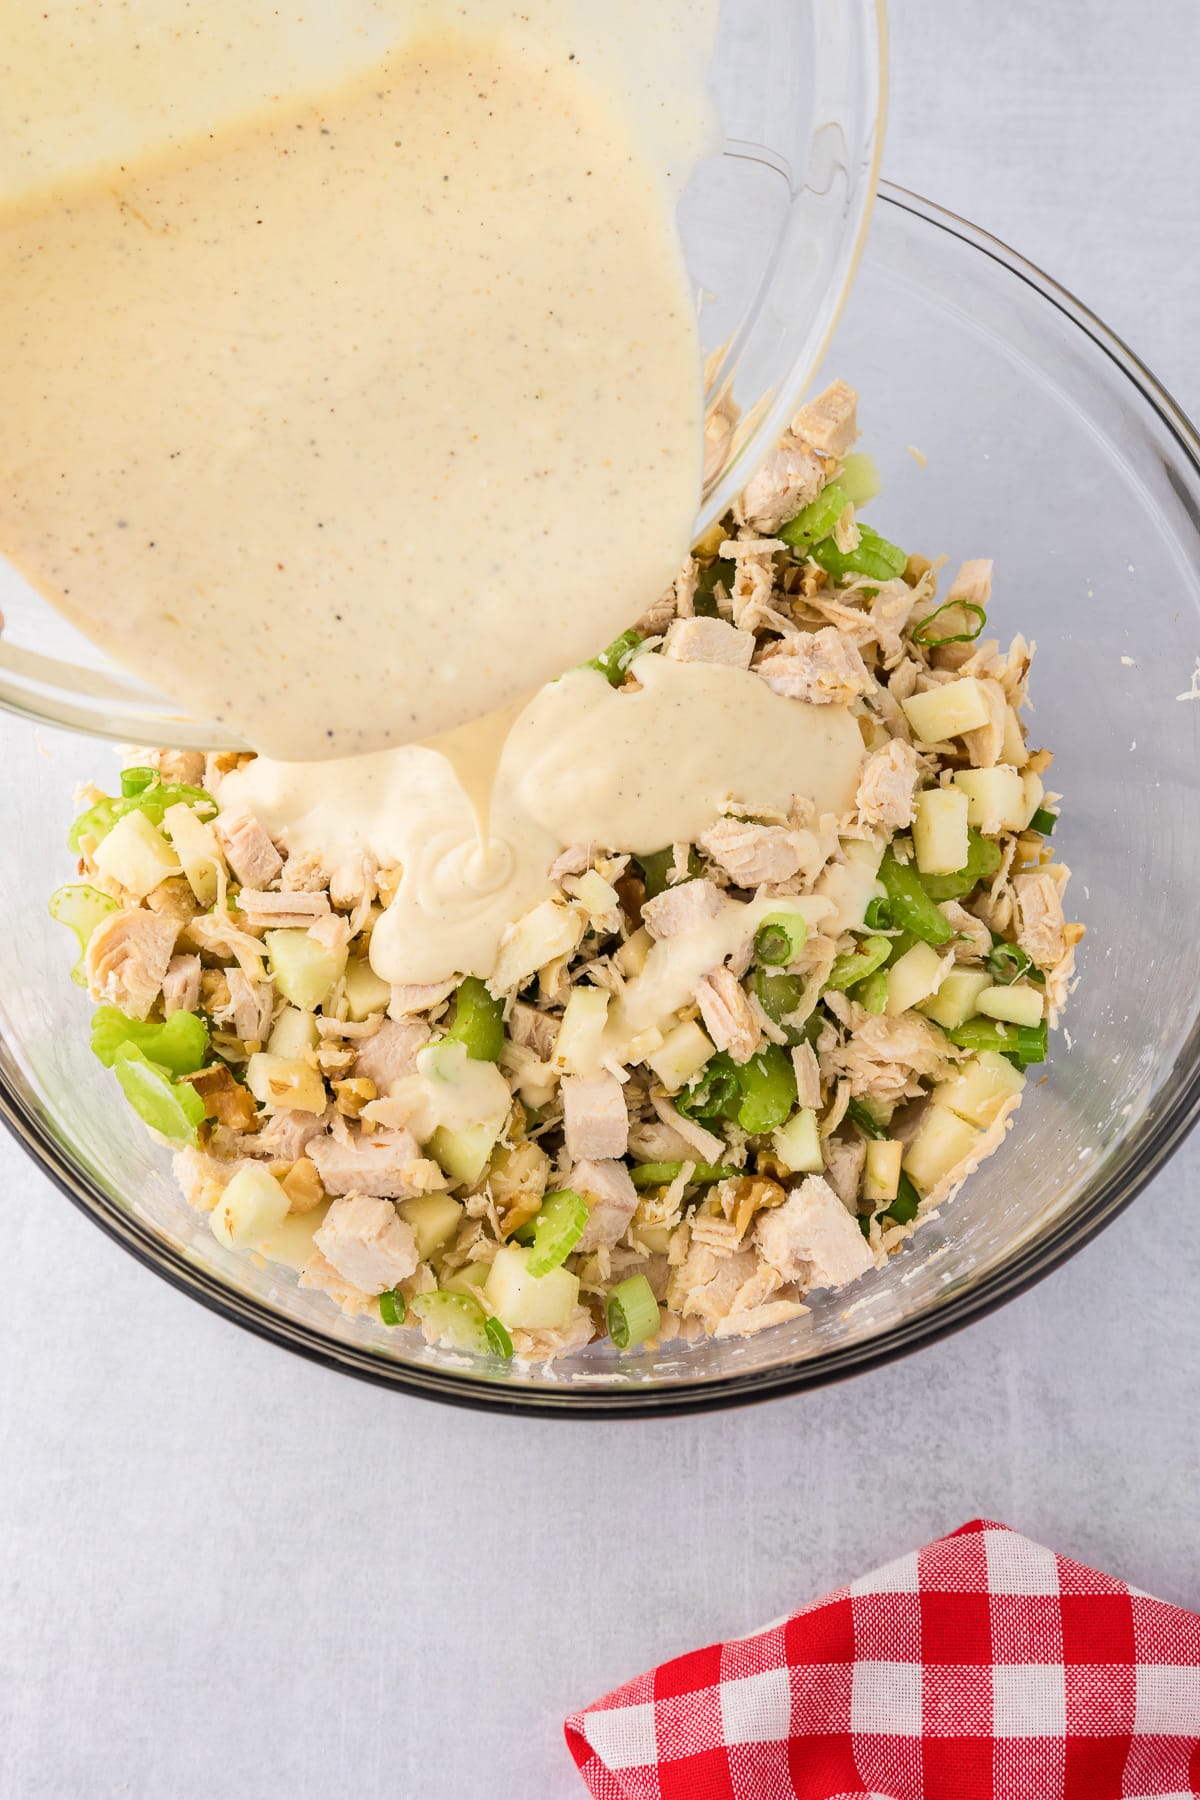 Dressing being poured into a bowl of chopped chicken, apples and celery pieces to make apple walnut chicken salad.